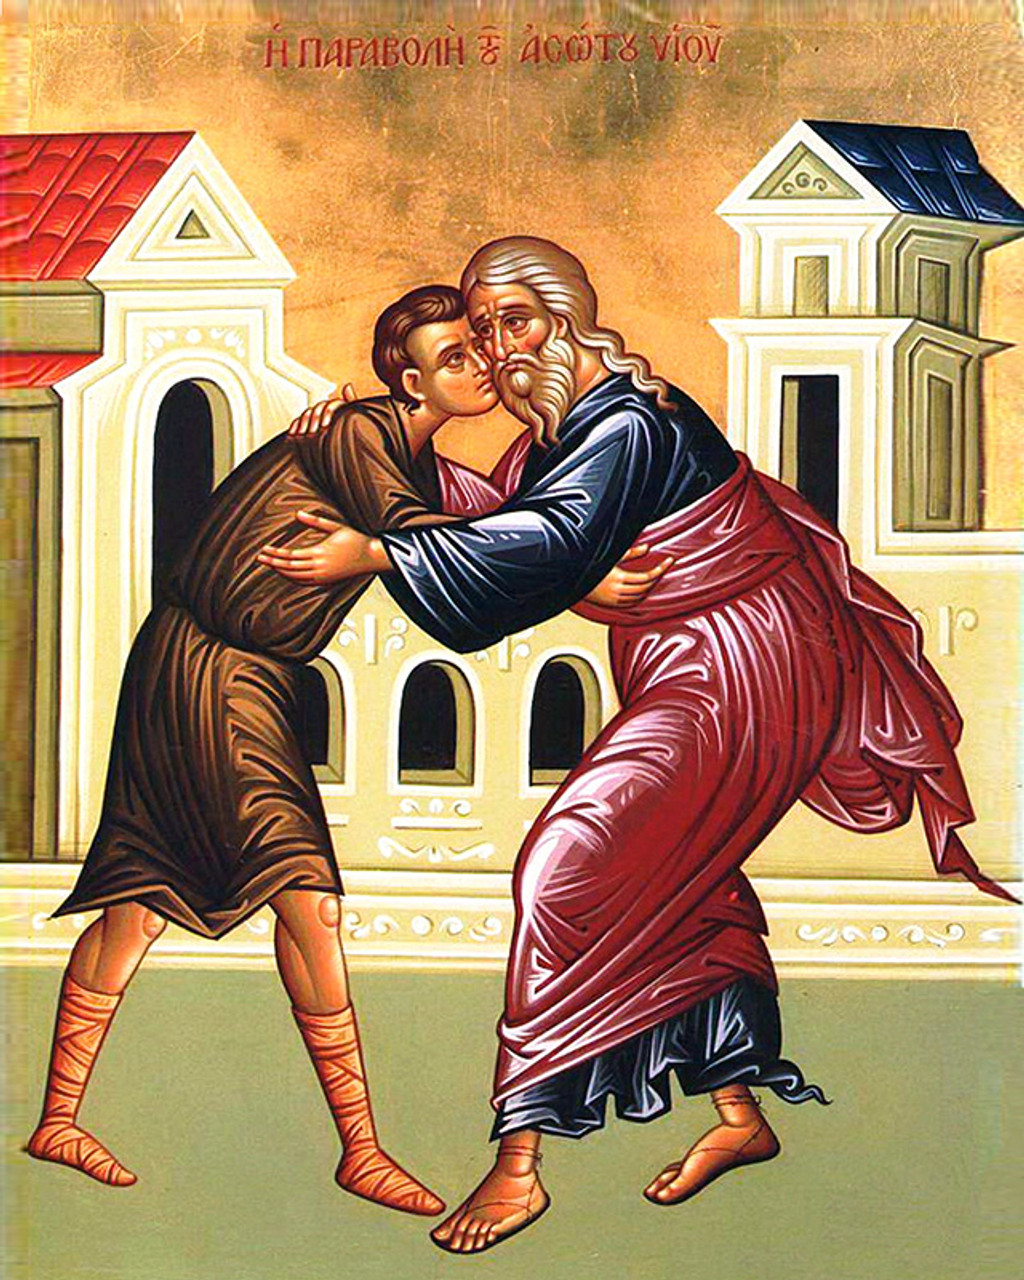 Second Sunday of Triodion—Sunday of the Prodigal Son | The Story of a Father and His Two Sons